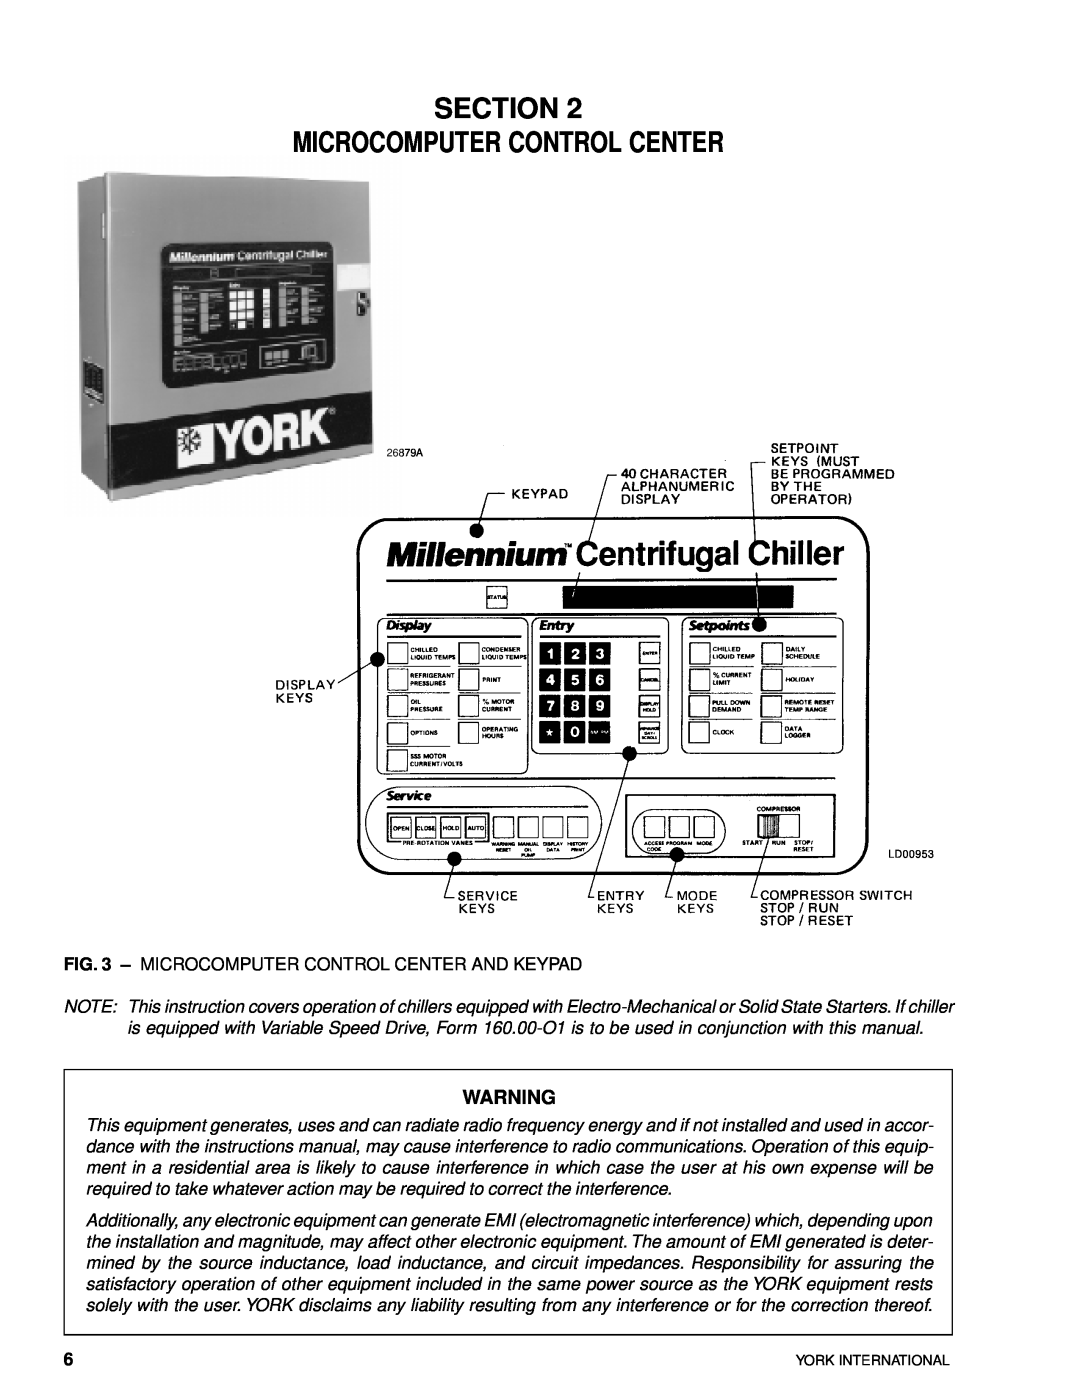 York YK M3 M3 G4 operation manual Section Microcomputer Control Center, Microcomputer Control Center And Keypad 